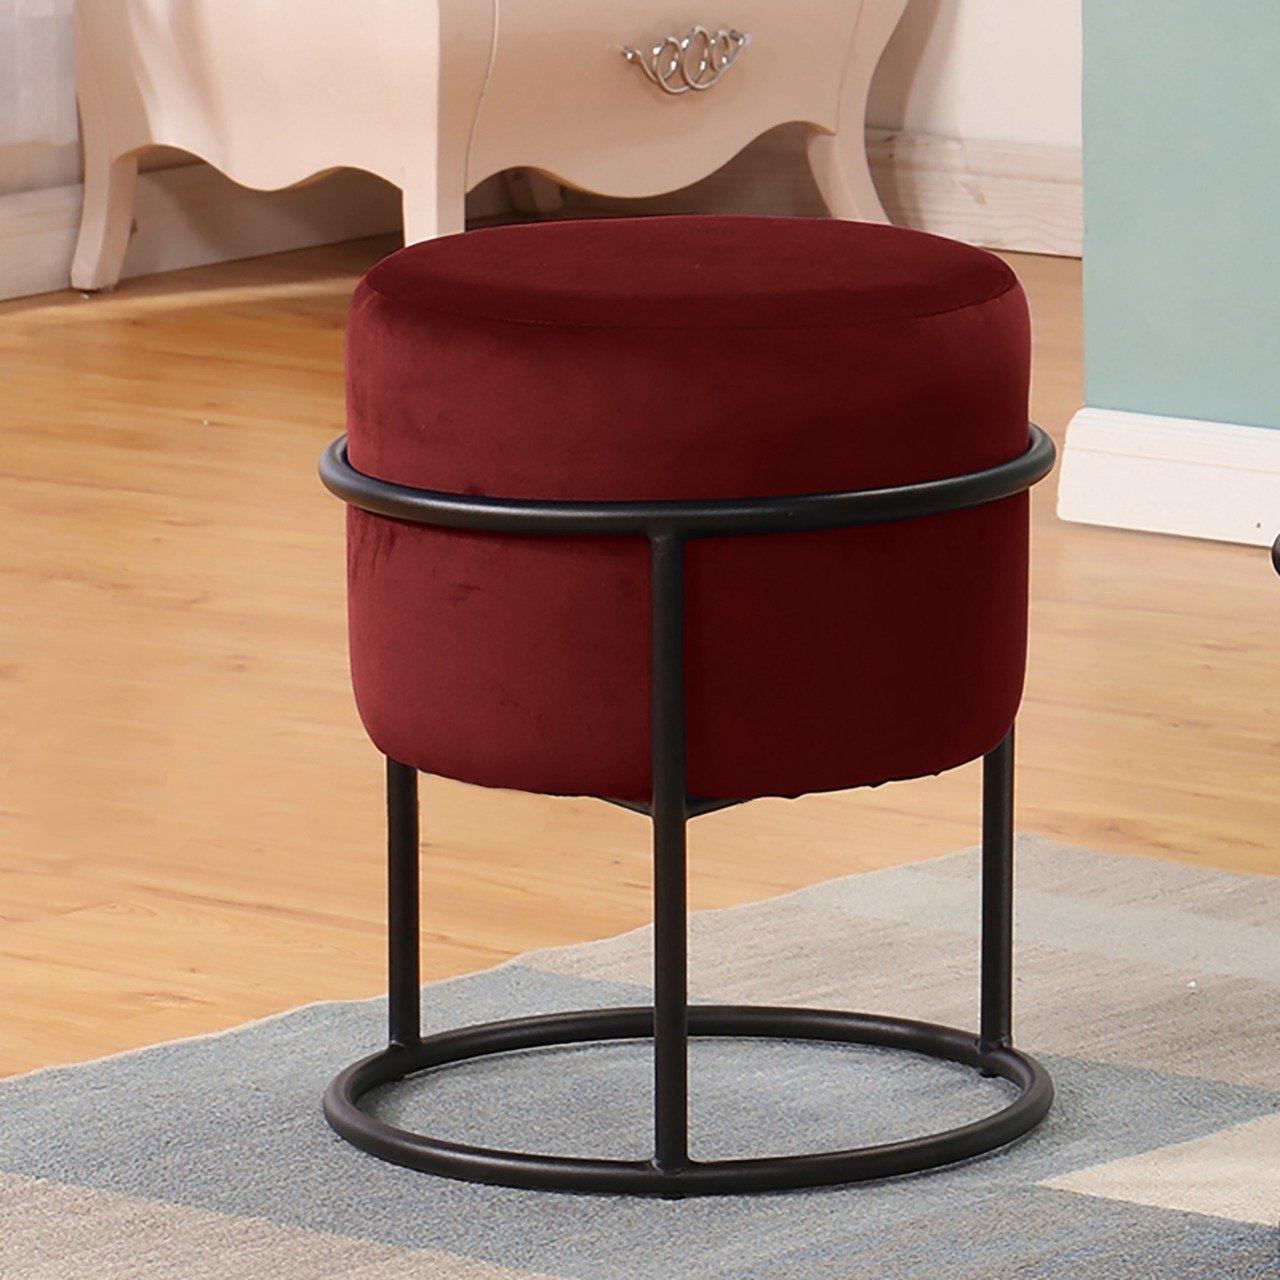 Luxury Wooden Round stool With Steel Stand -342 - 92Bedding